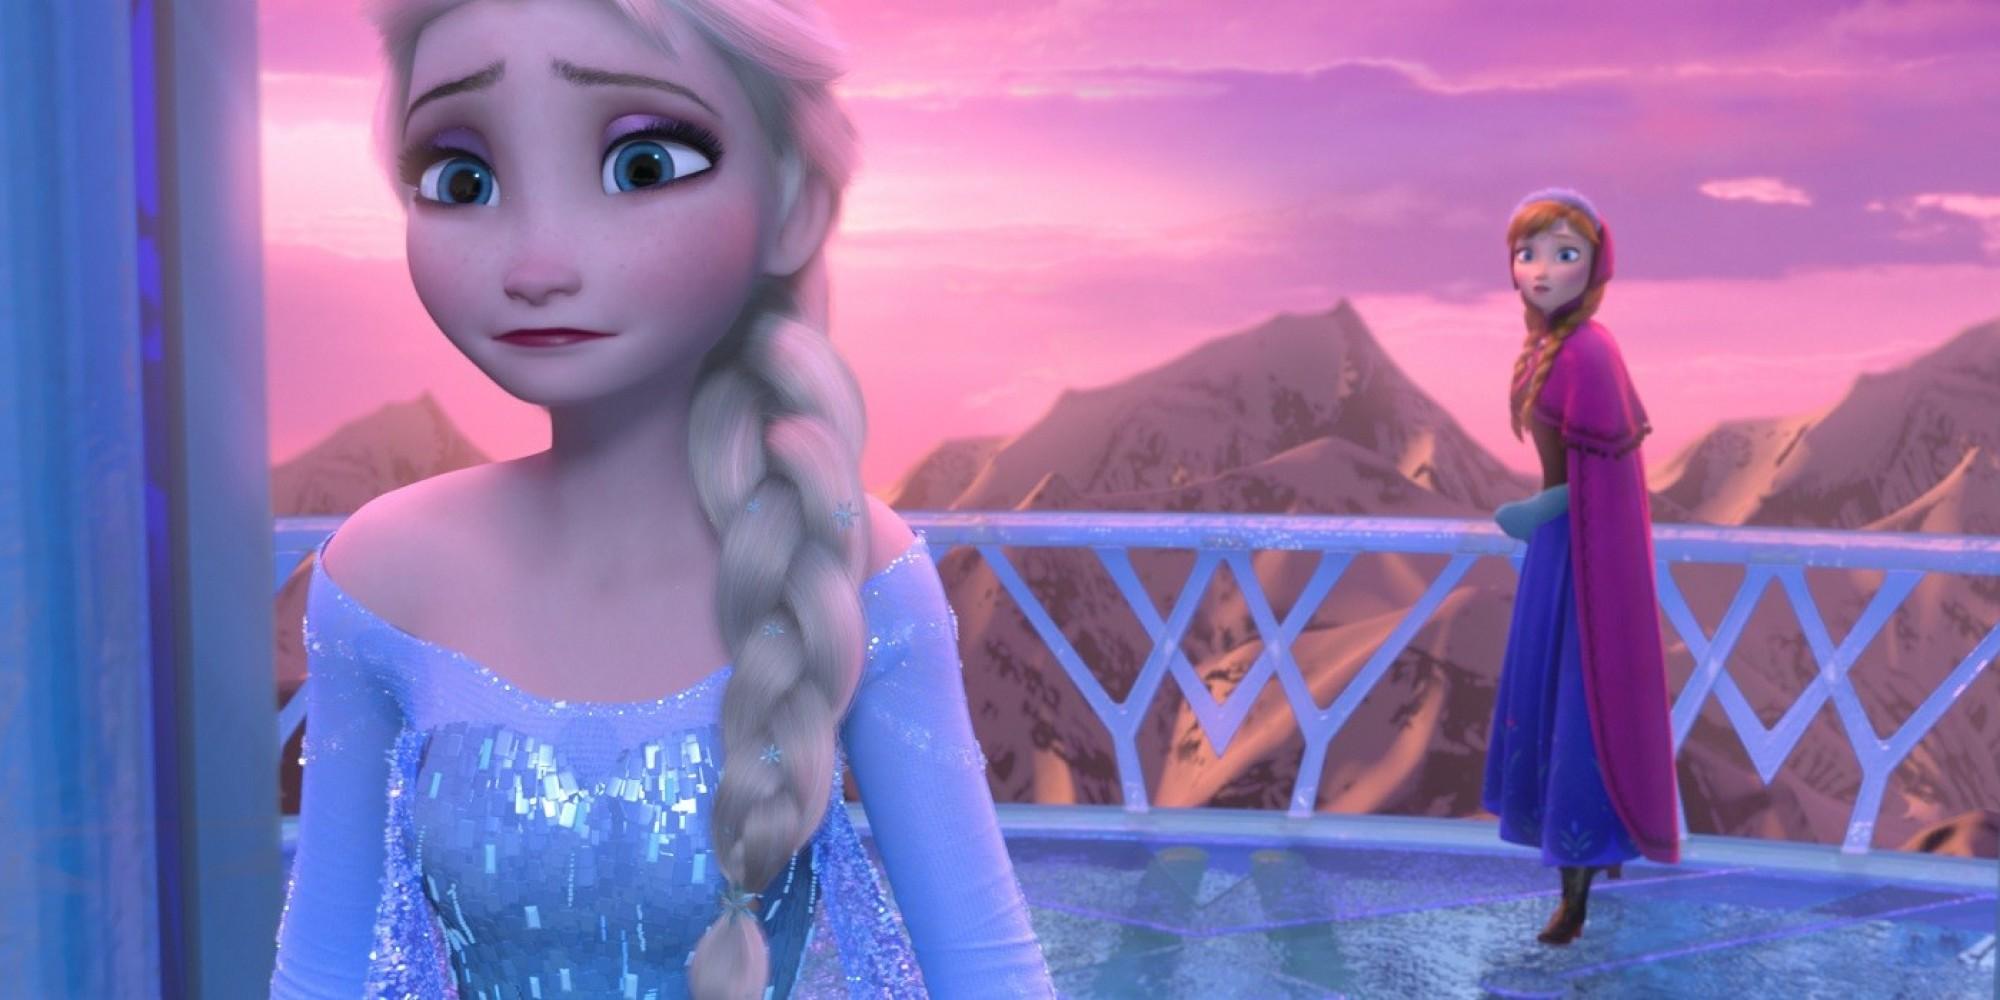 How Is 'Frozen' Different From 'The Snow Queen' By Hans